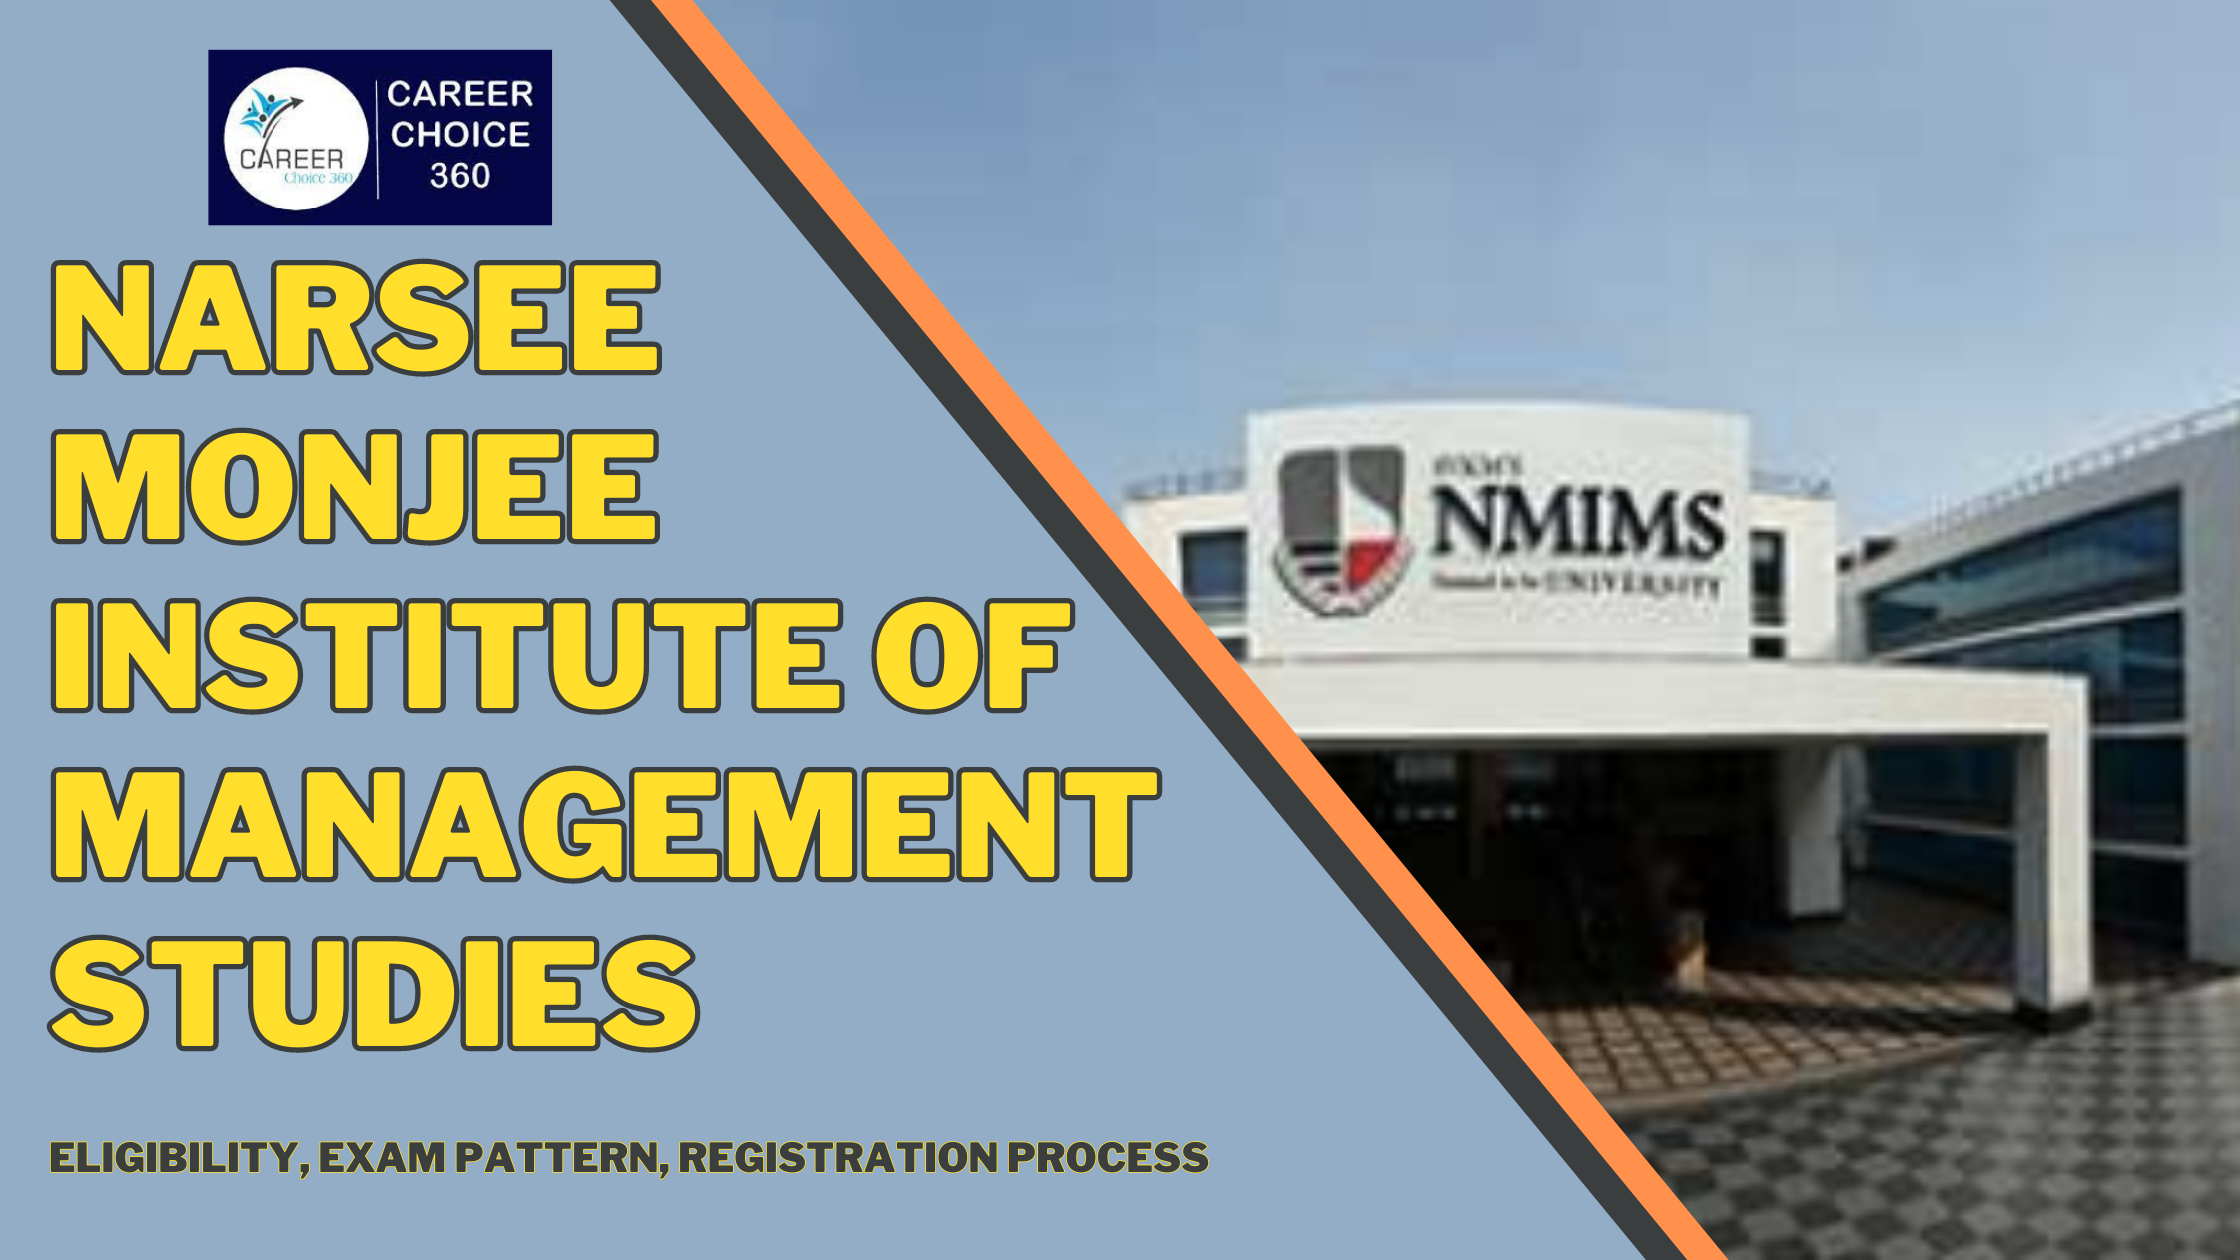 You are currently viewing The Future of Management Education: Exploring the Vision of Narsee Monjee Institute of Management Studies